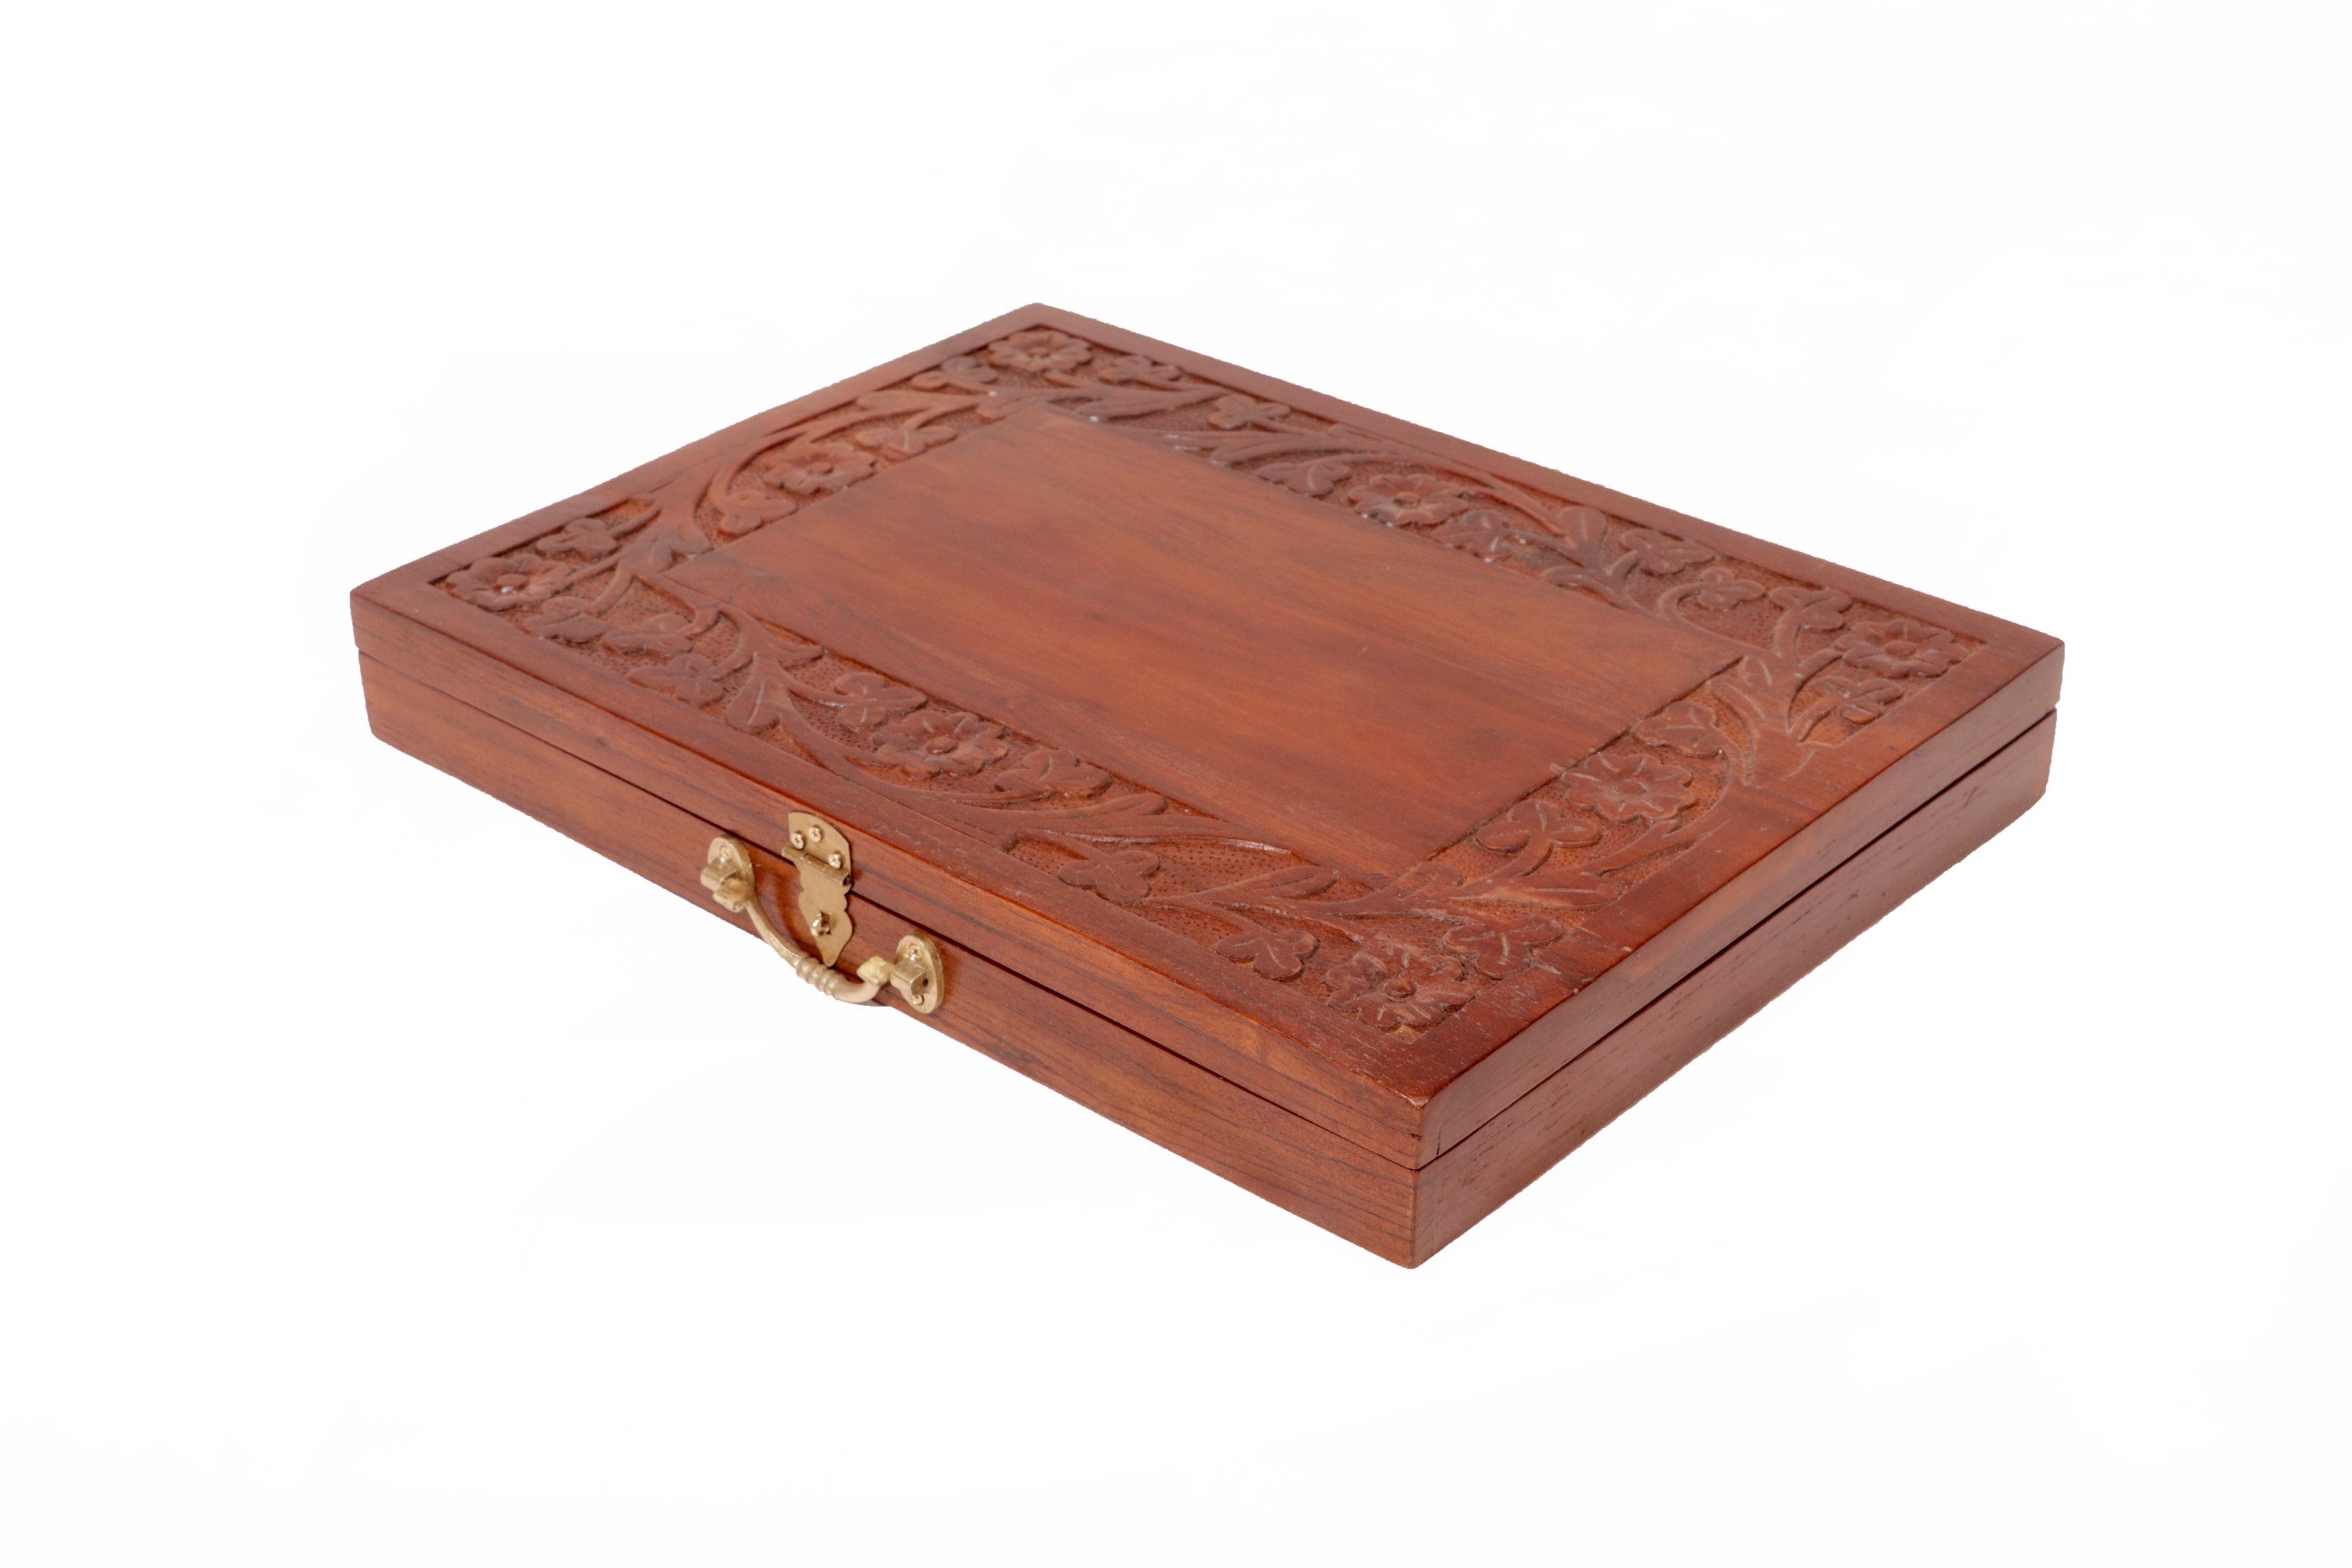 Wooden Carved Flower Petal Box Large (19 x 14 x 2.5 Inch) Wooden Box